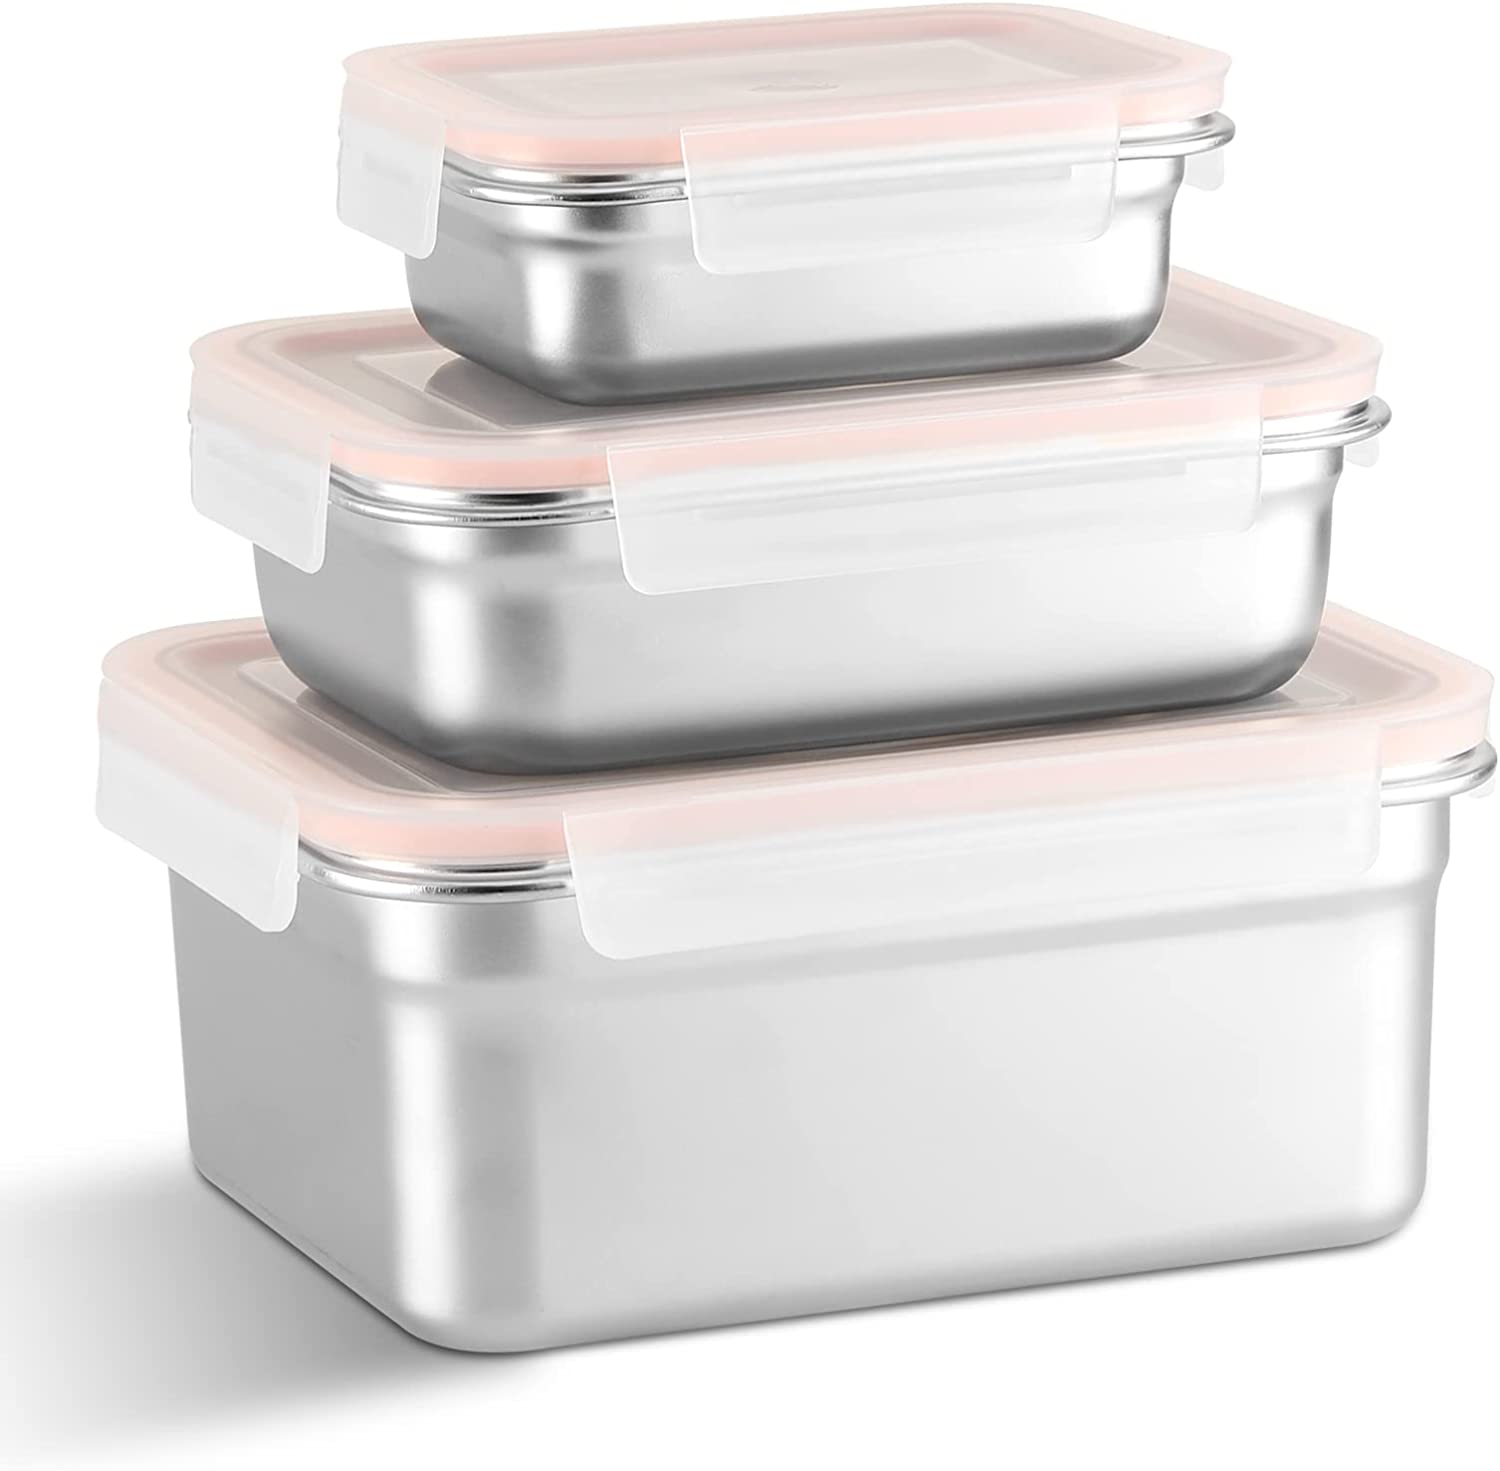 6 Pc Stainless Steel Covered Square Container Set - Frosted Lids